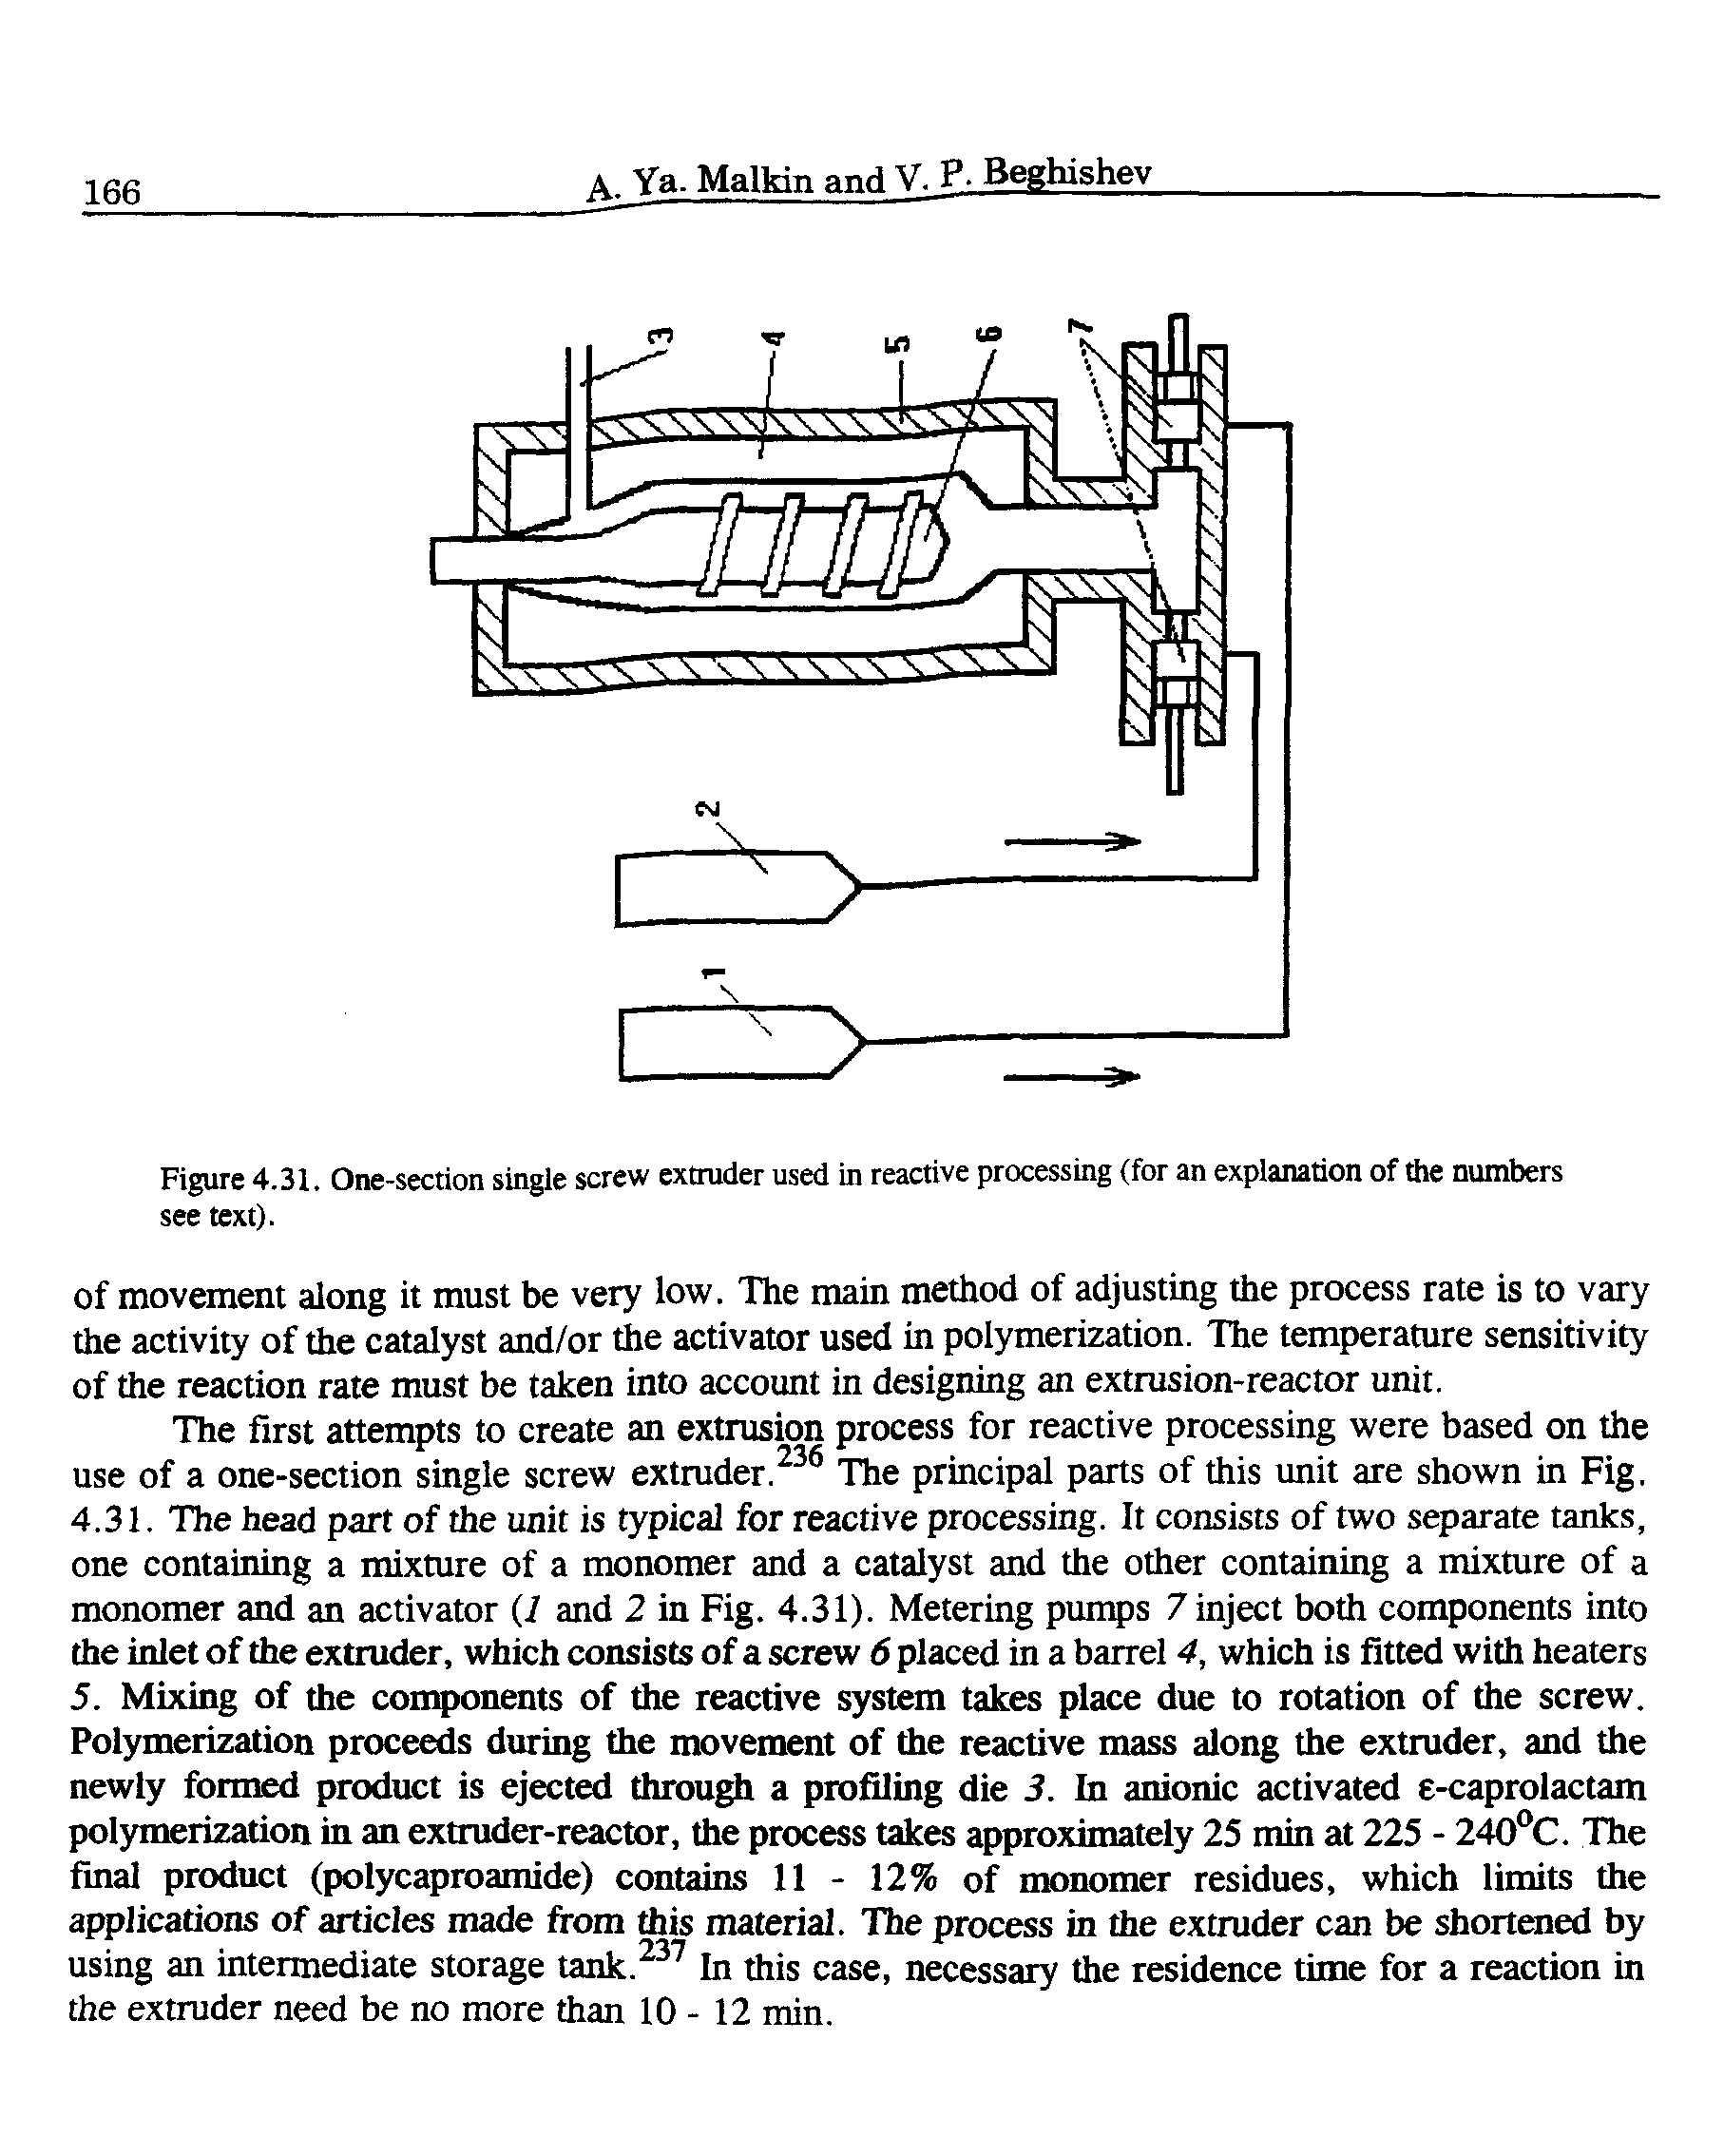 Figure 4.31. One-section single screw extruder used in reactive processing (for an explanation of the numbers see text).